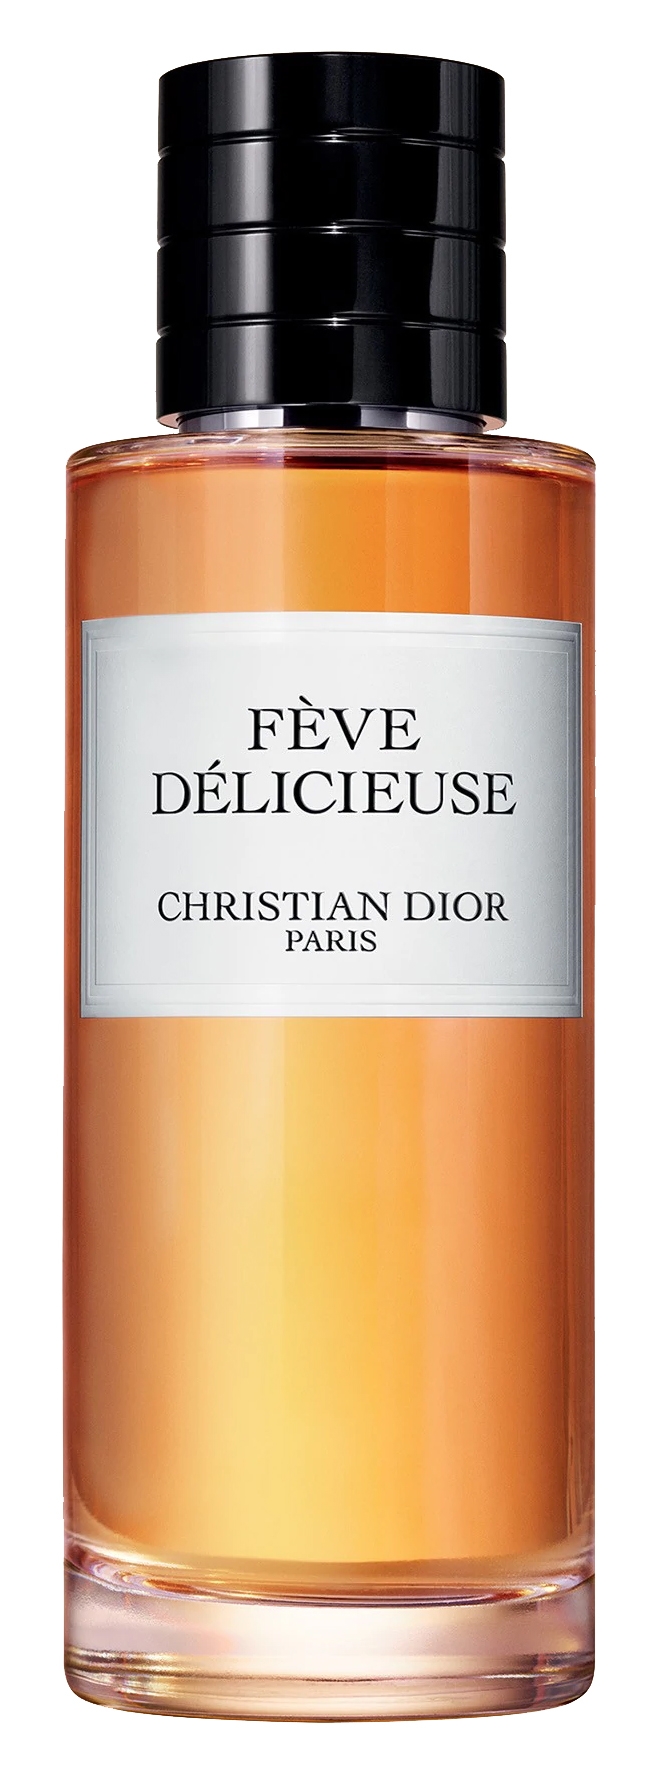 dior feve delicieuse